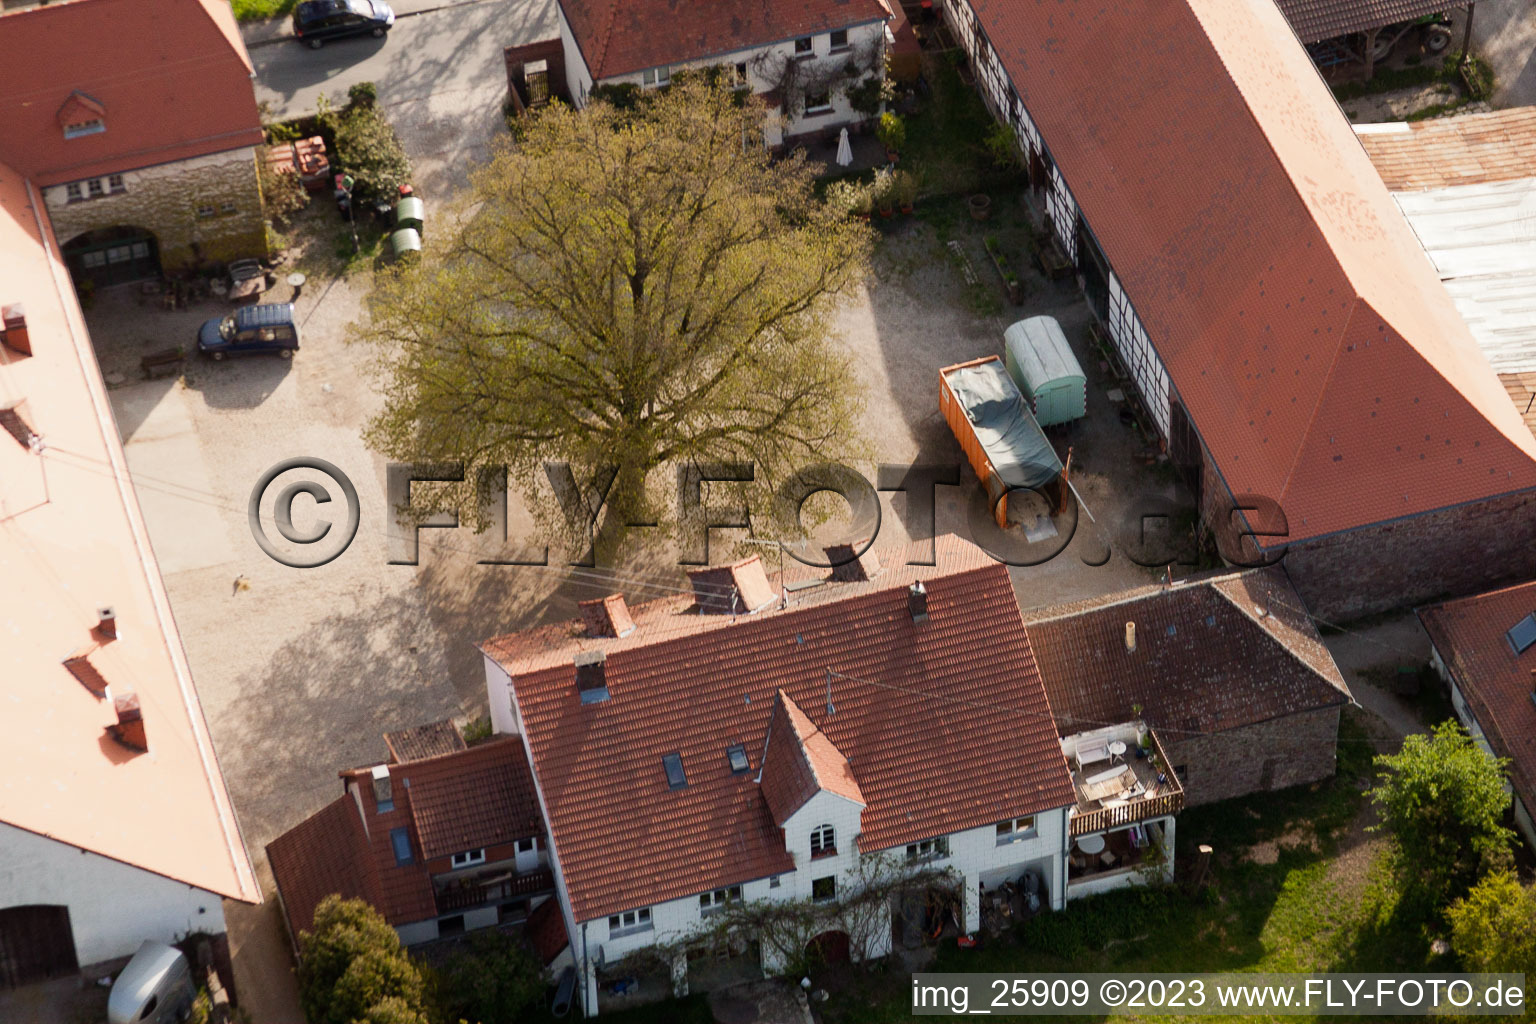 Drone recording of Rittnerthof in the district Durlach in Karlsruhe in the state Baden-Wuerttemberg, Germany